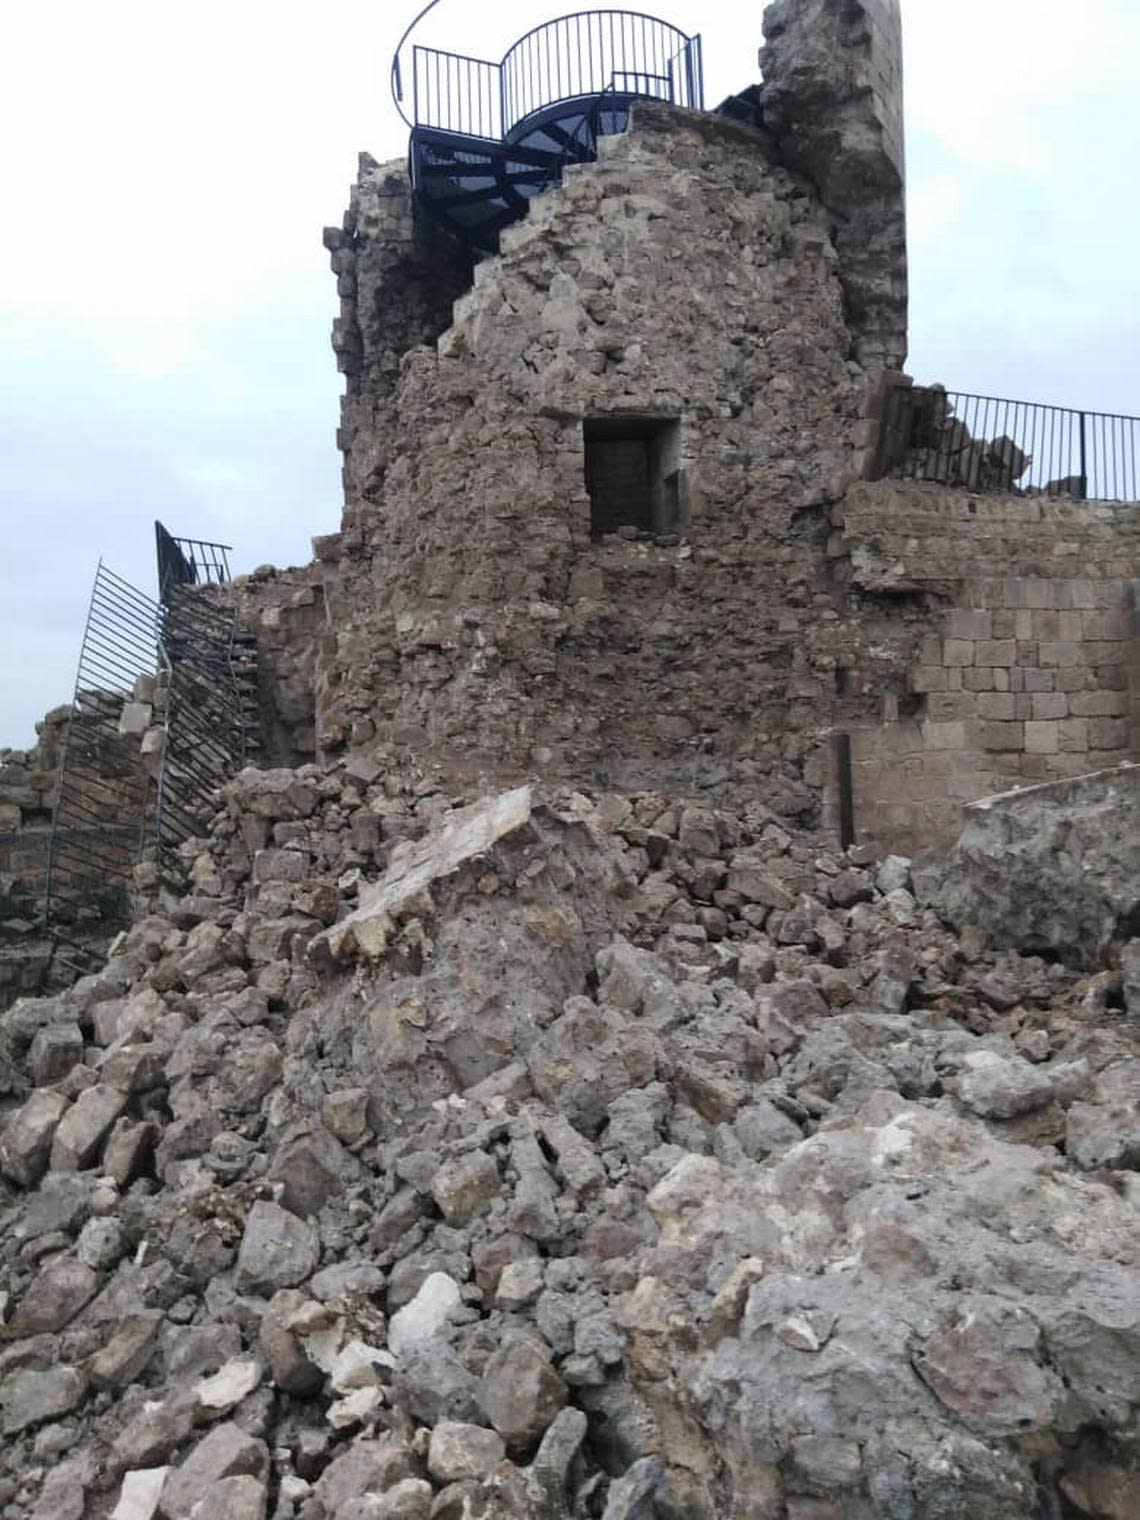 A partially collapsed tower with its internal structure exposed